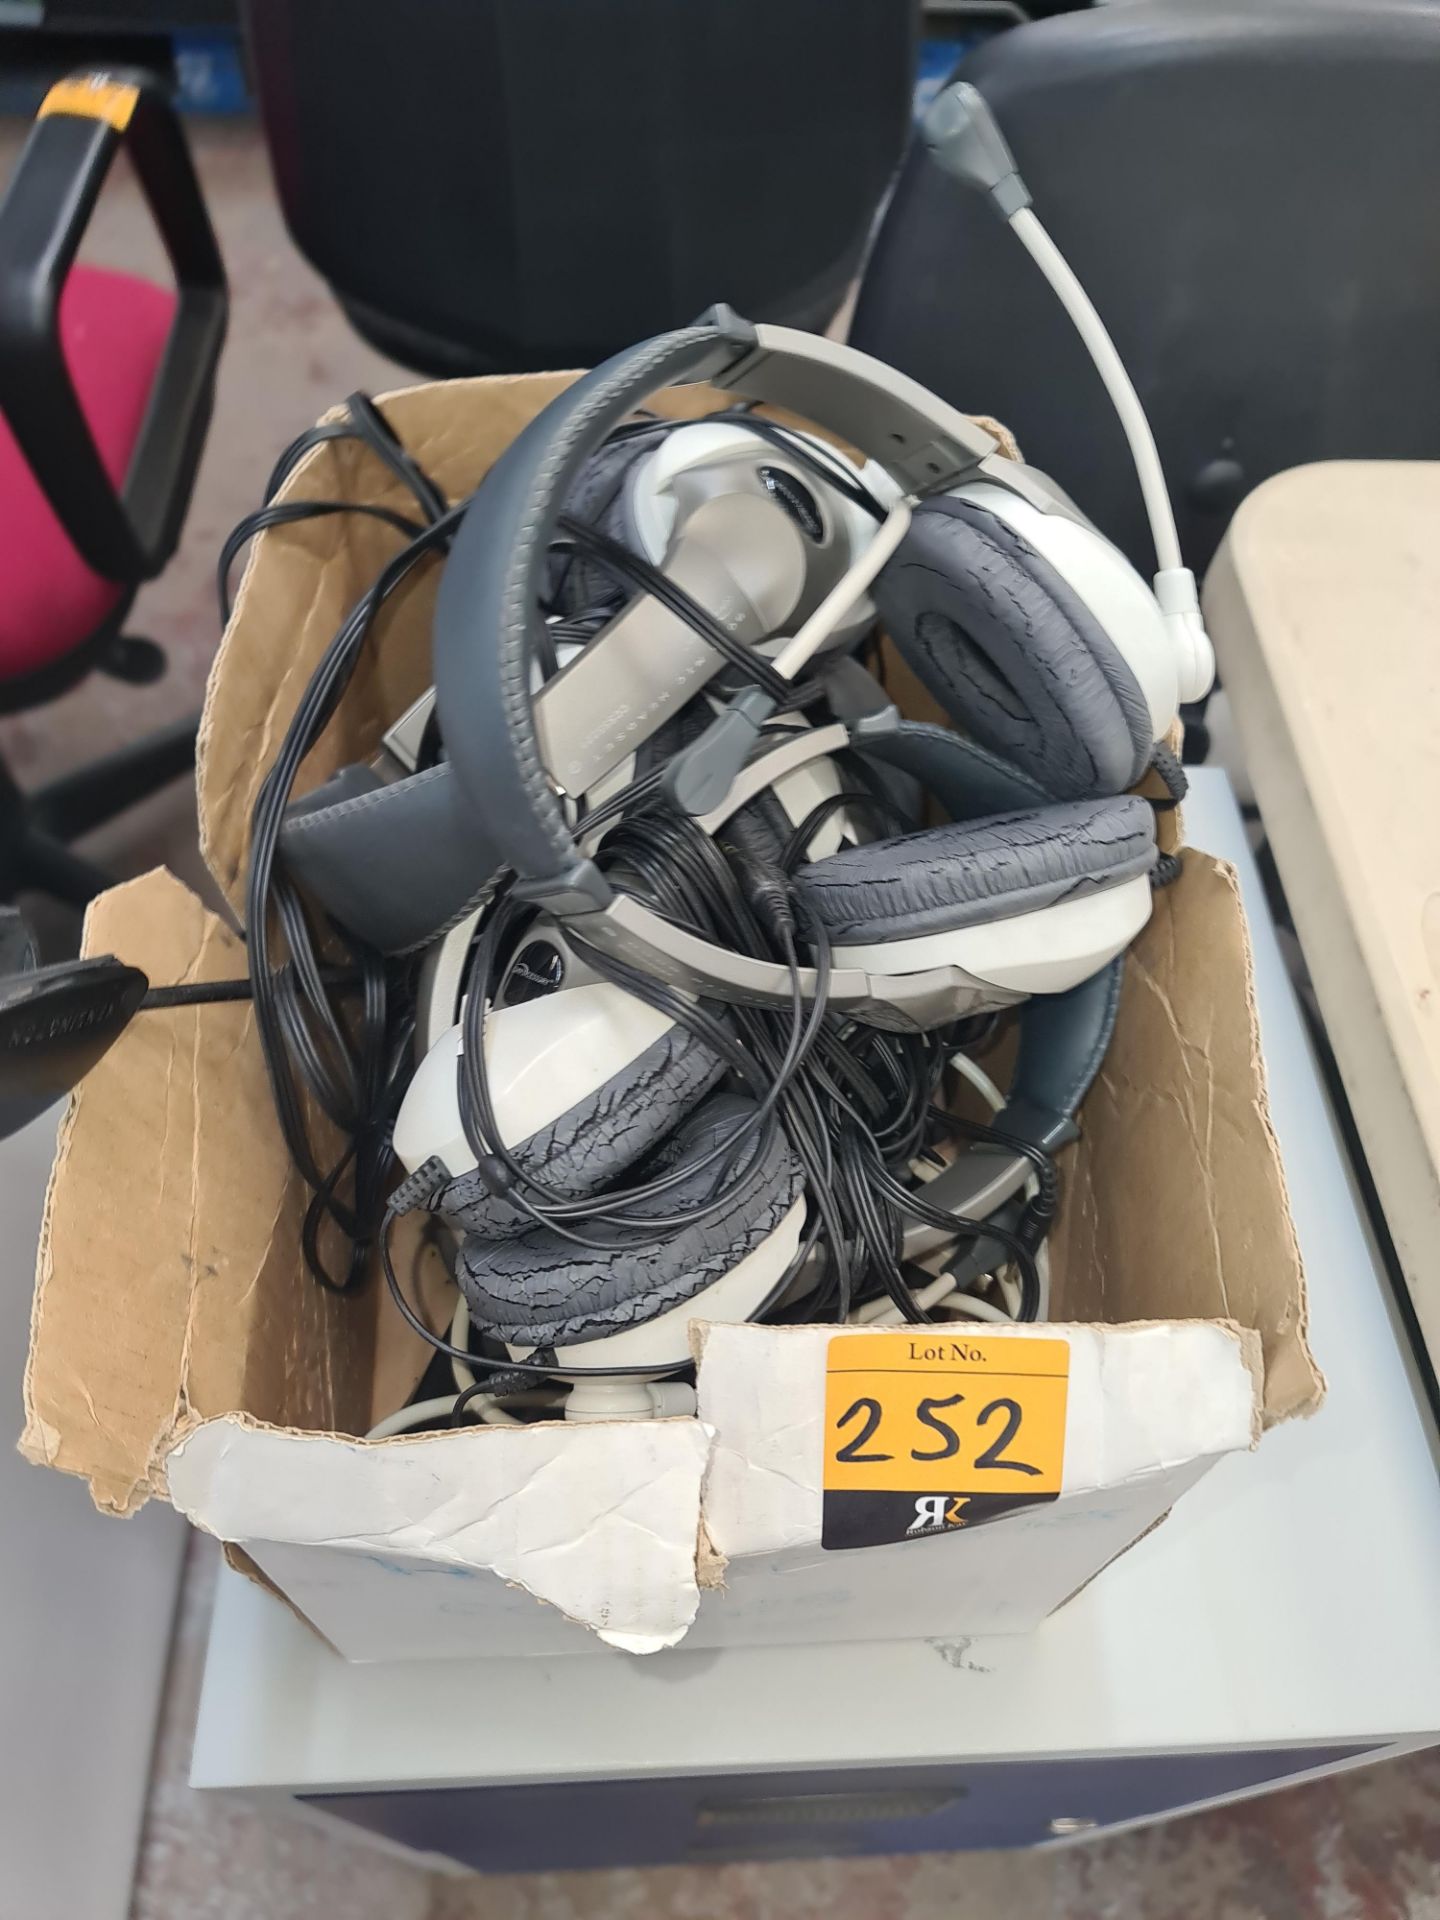 7 off Compucessory boom mic headsets plus other IT related items